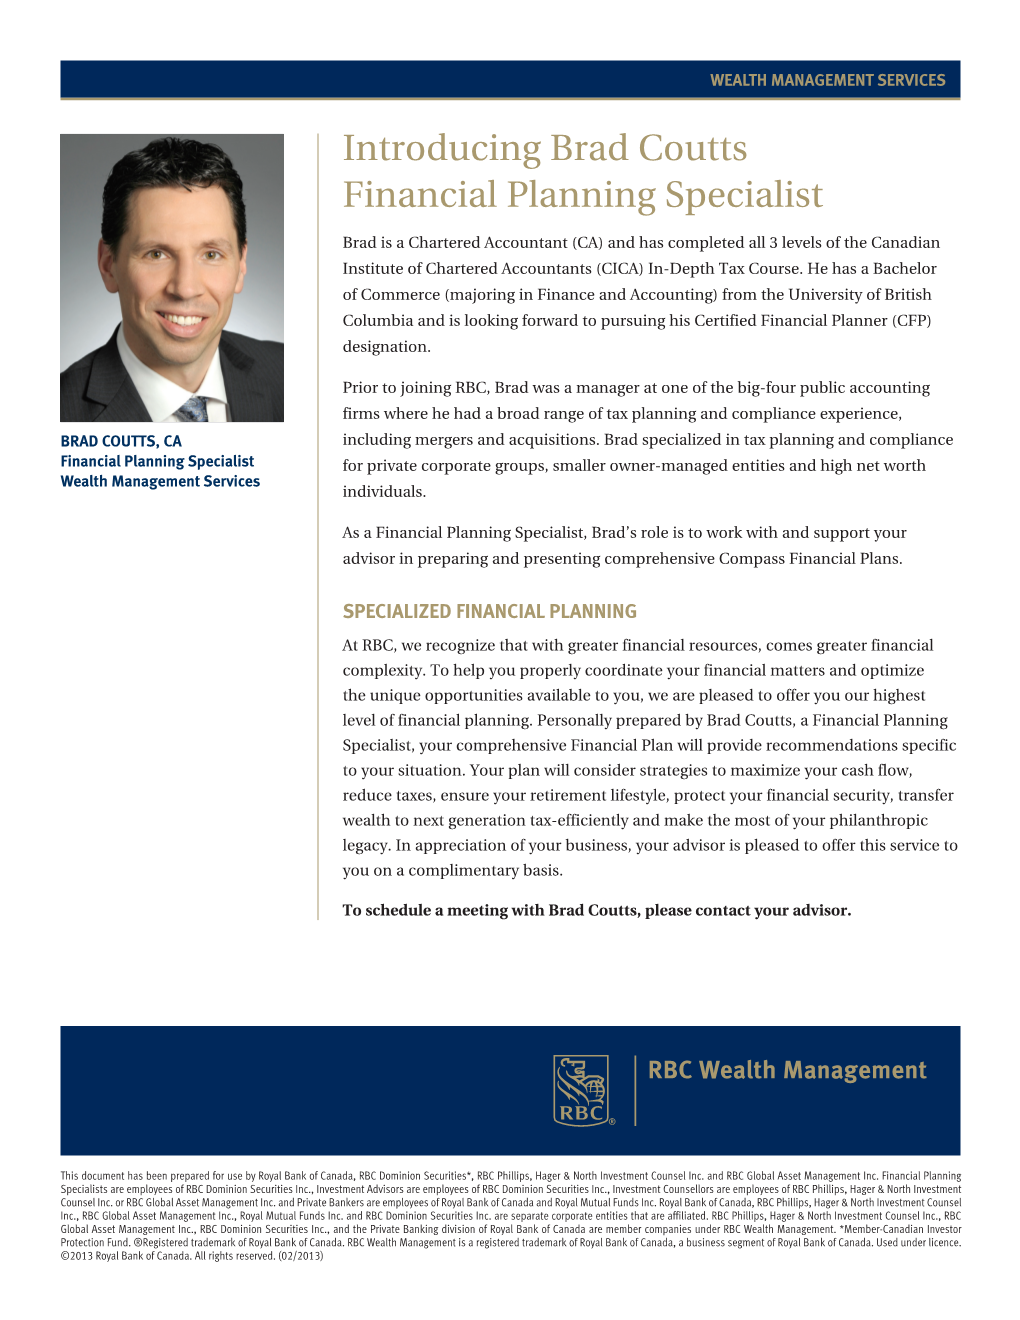 Introducing Brad Coutts Financial Planning Specialist